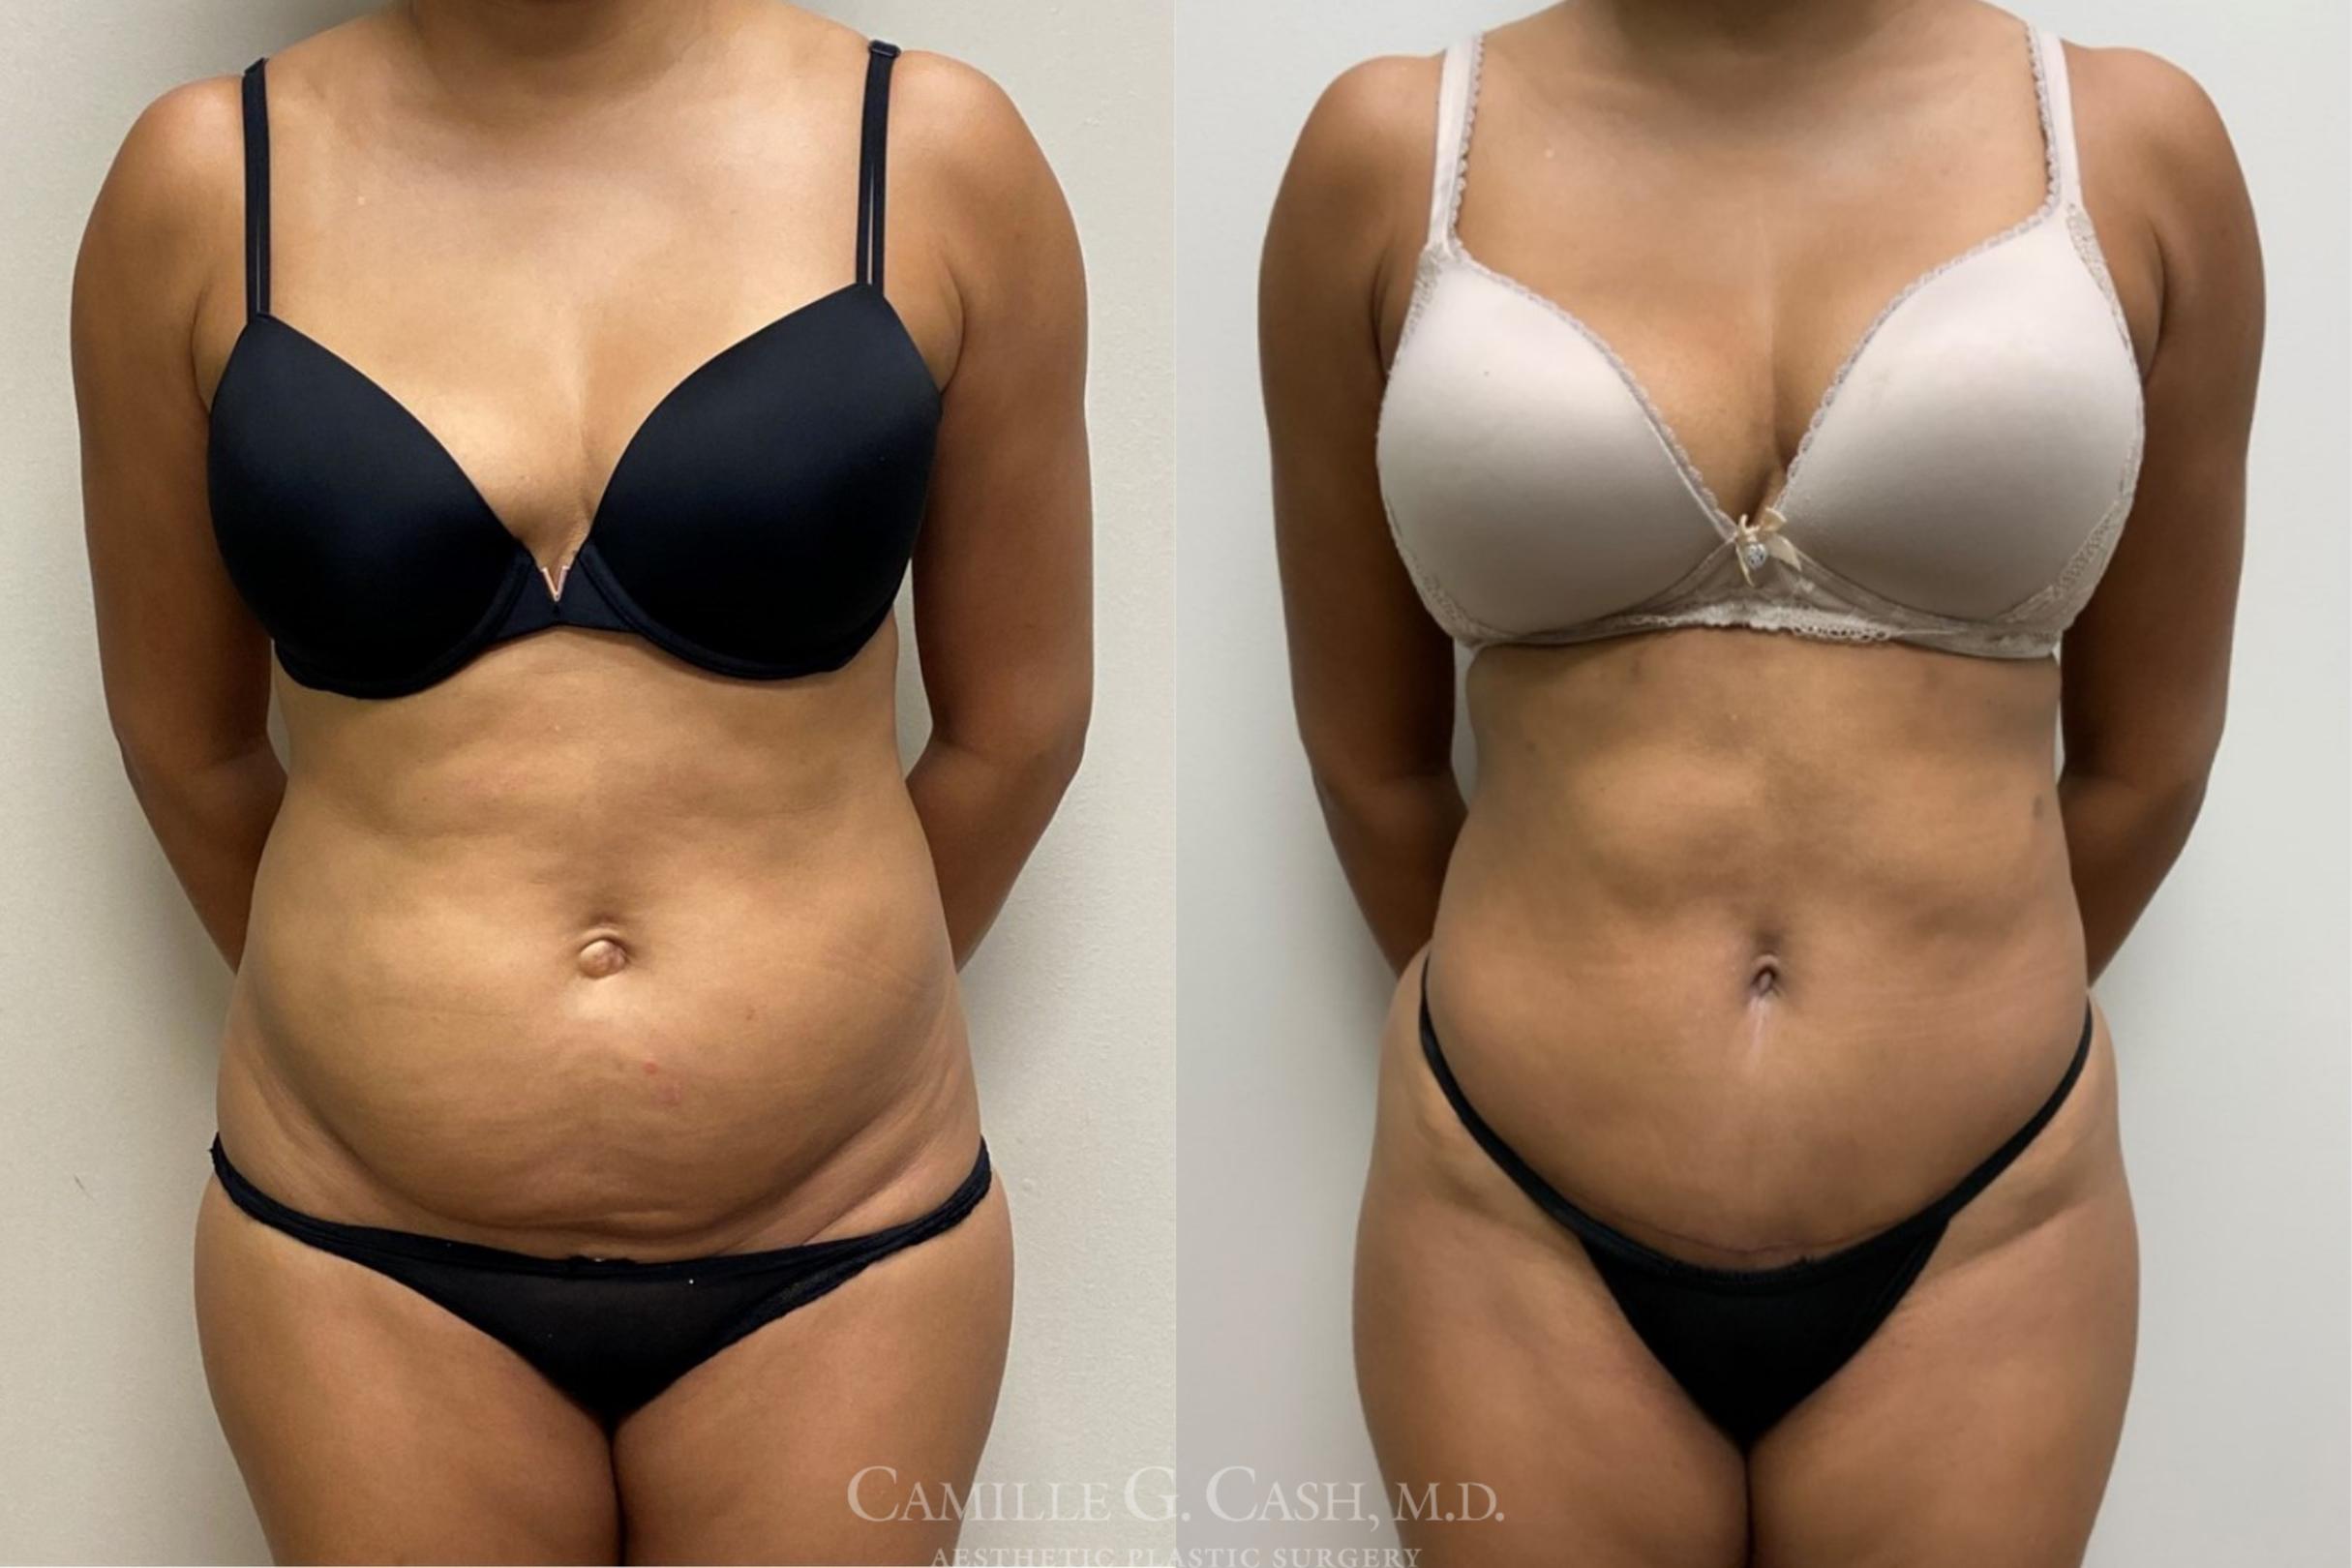 Liposuction Before and After Photo Gallery | Houston, TX | Camille Cash,  M.D.